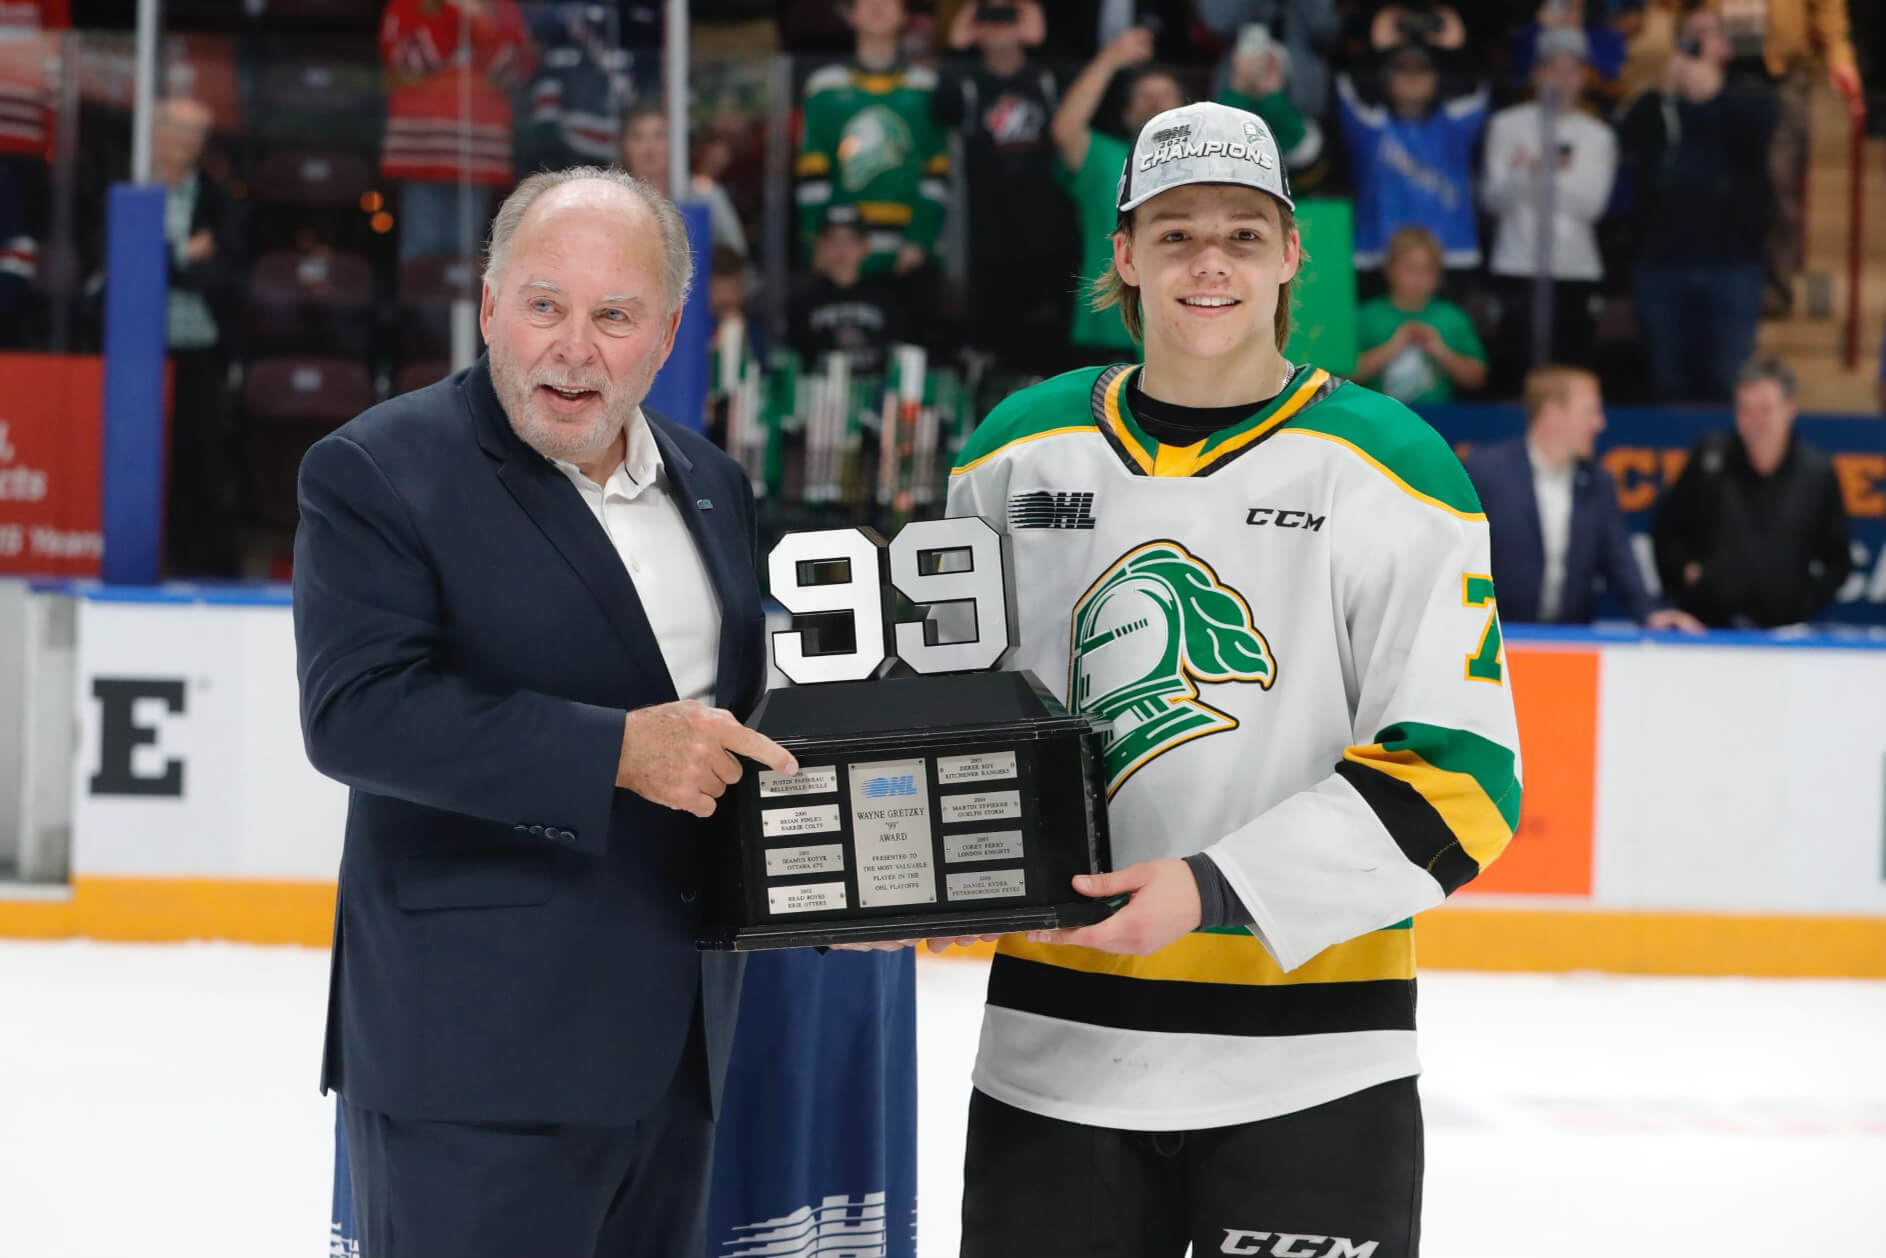 Leafs prospect Easton Cowan is an OHL MVP and champion. What does it mean for his future?